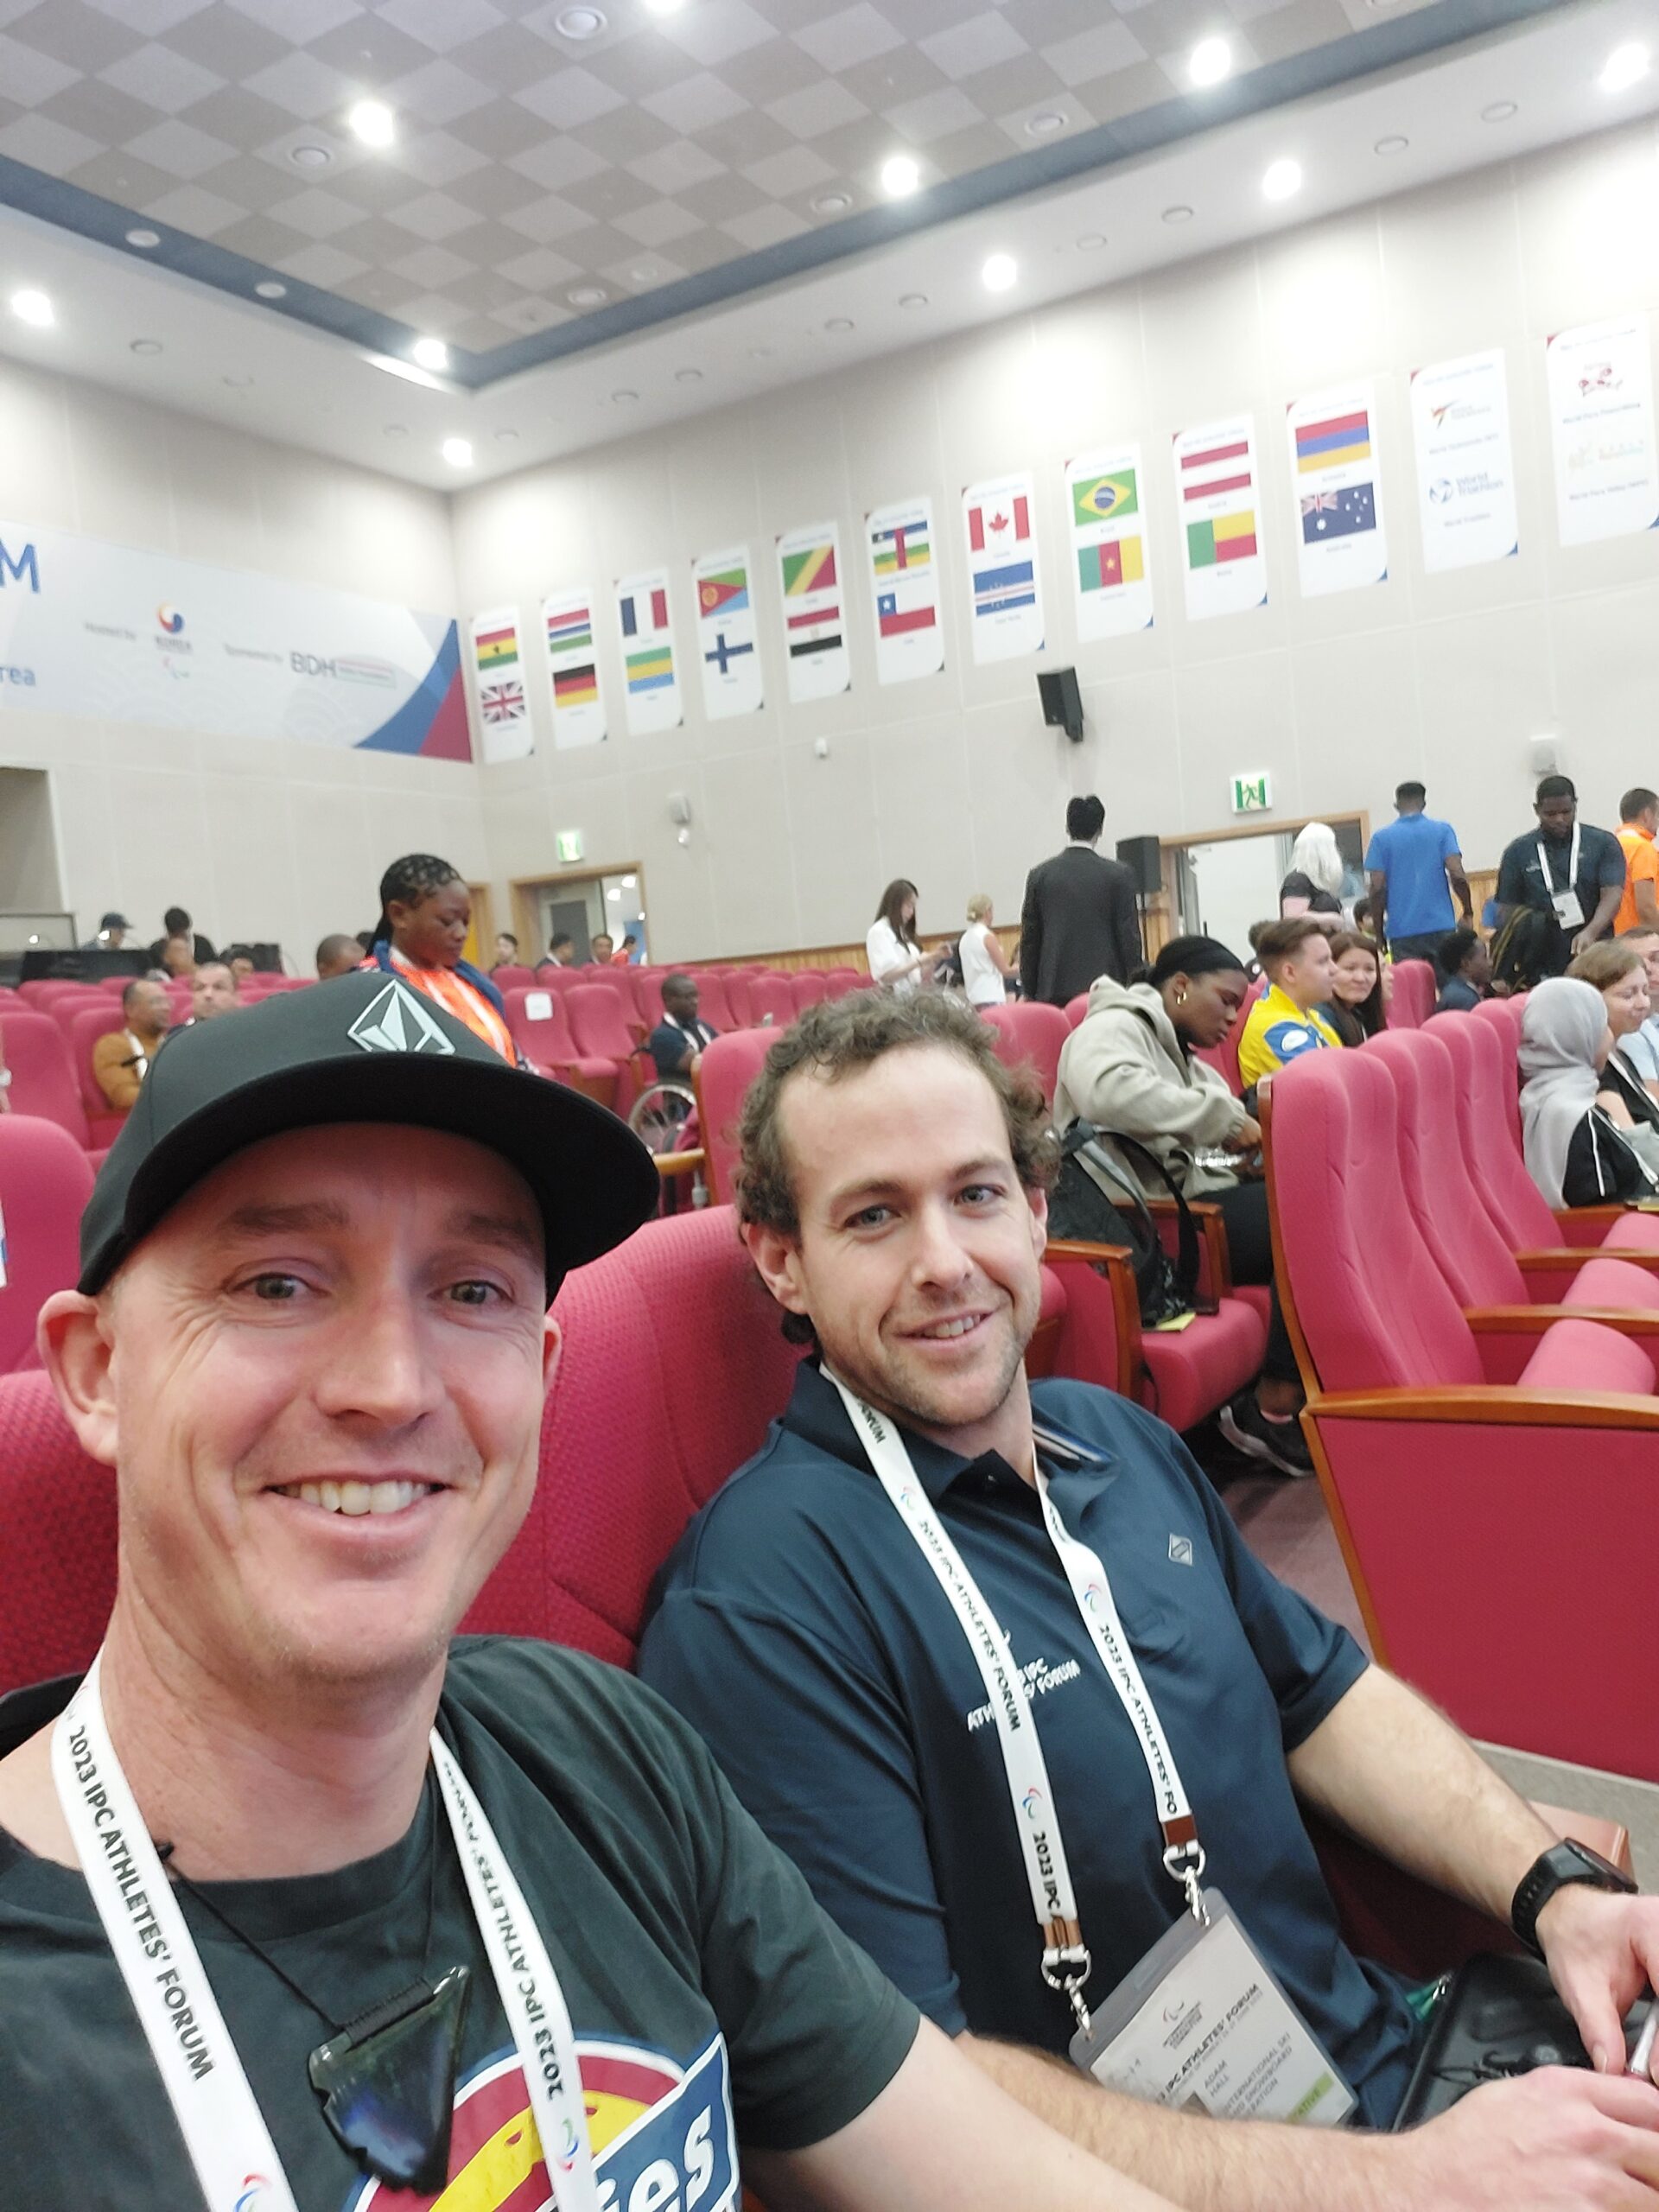 Carl Murphy and Adam Hall selfie in IPC Athletes' Forum conference hall with lots of country flags on the wall.